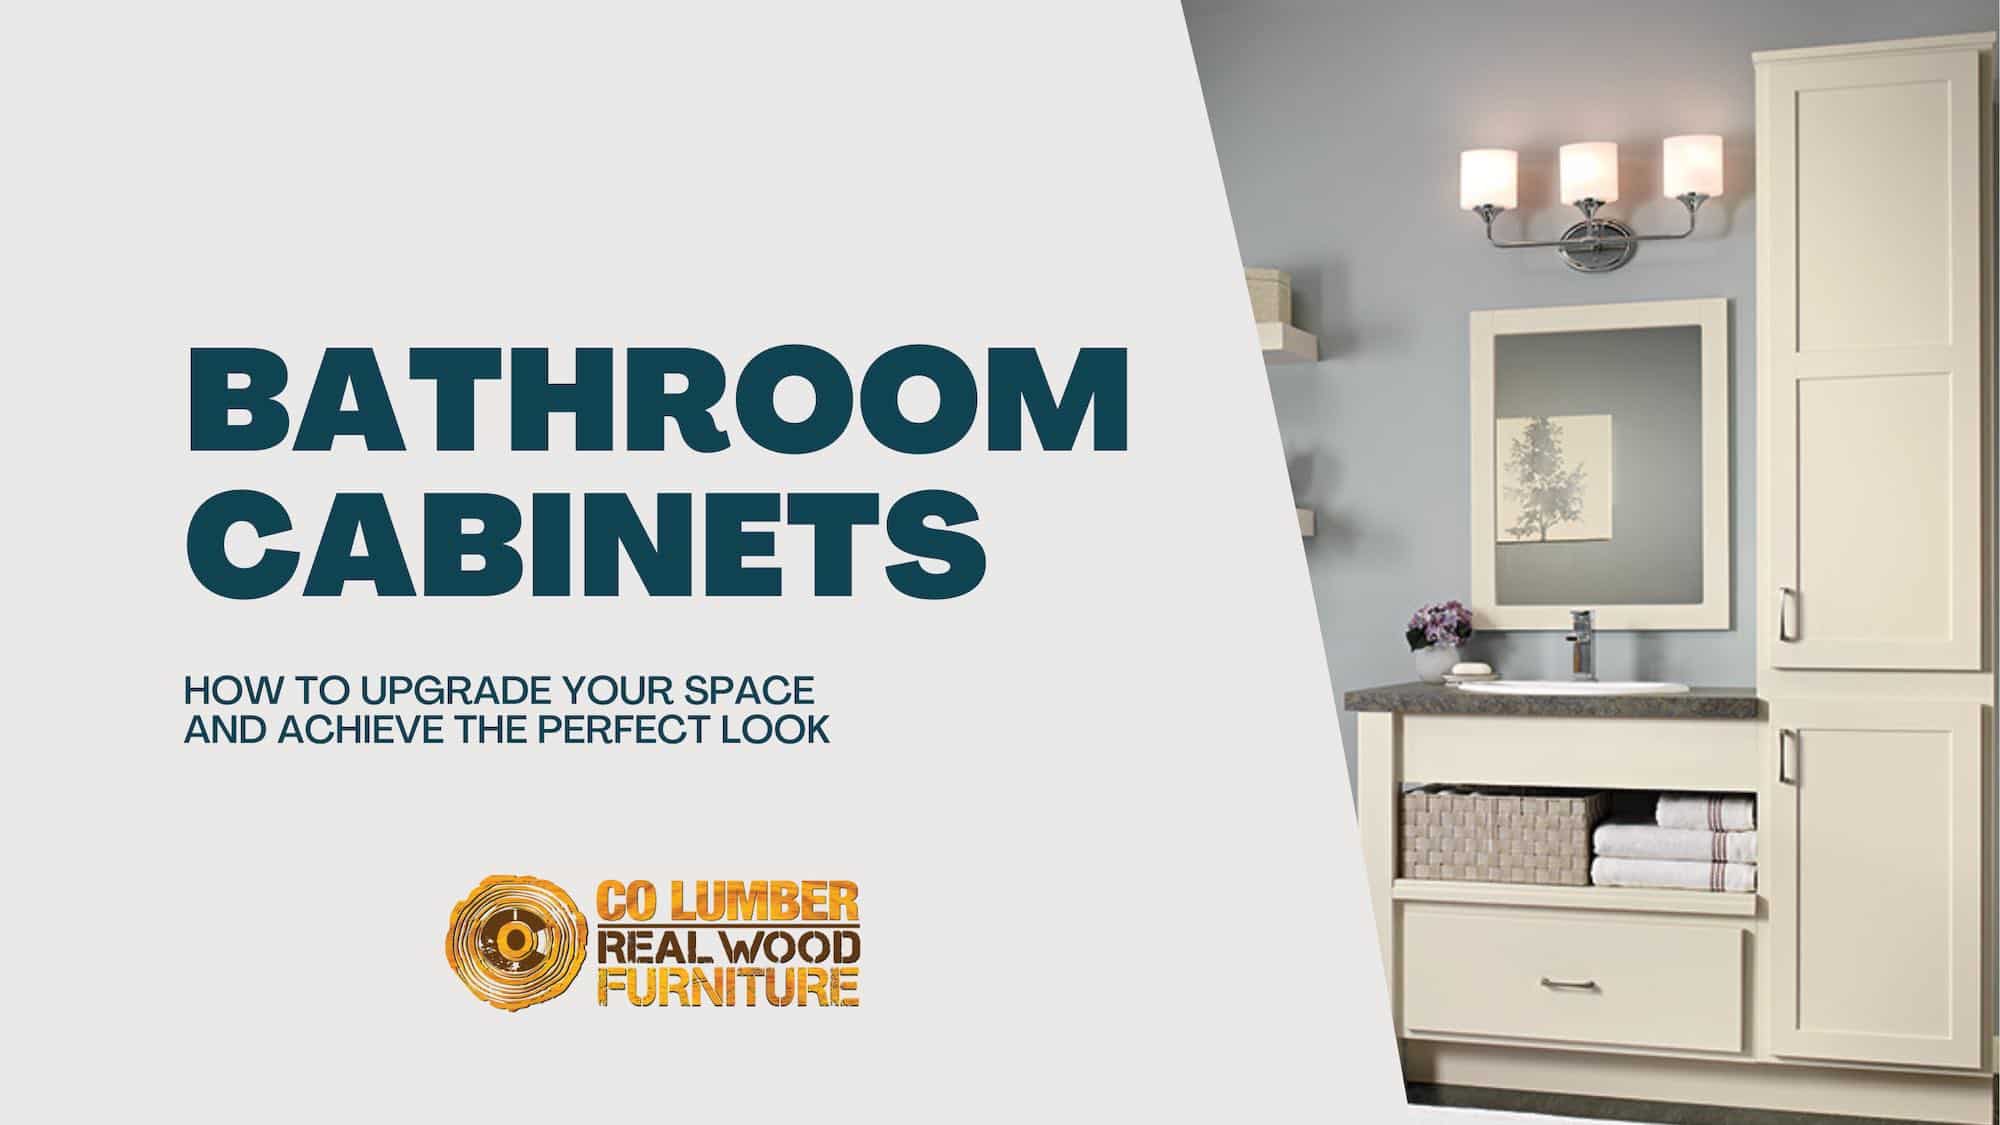 Bathroom Cabinets 101: How to Upgrade Your Space and Achieve the Perfect Look